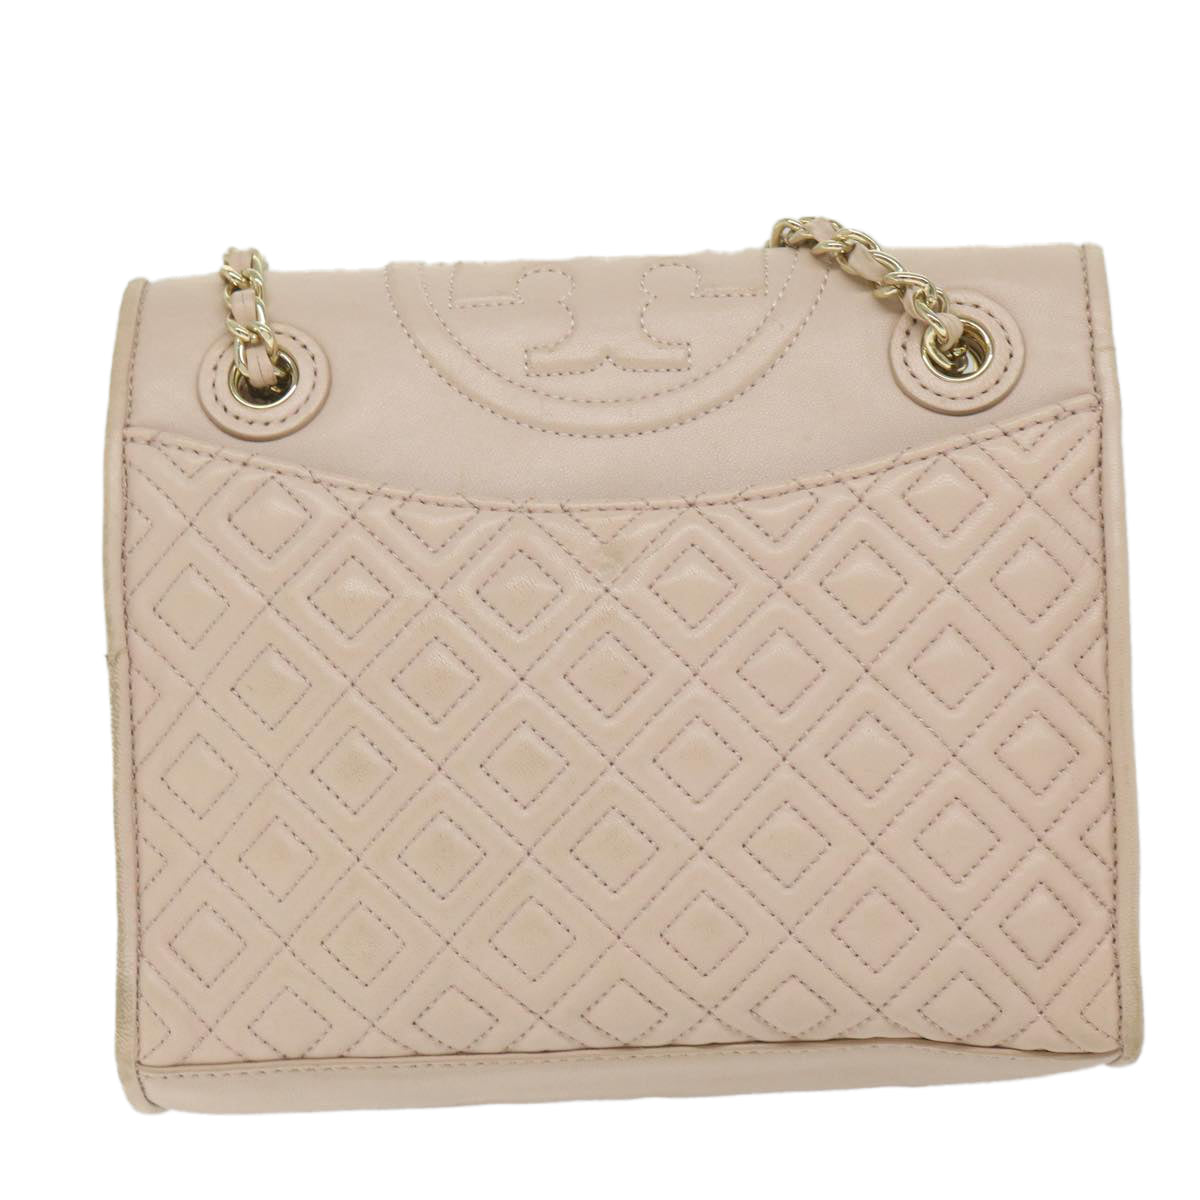 TORY BURCH Quilted Chain Shoulder Bag Leather Pink Auth am5282